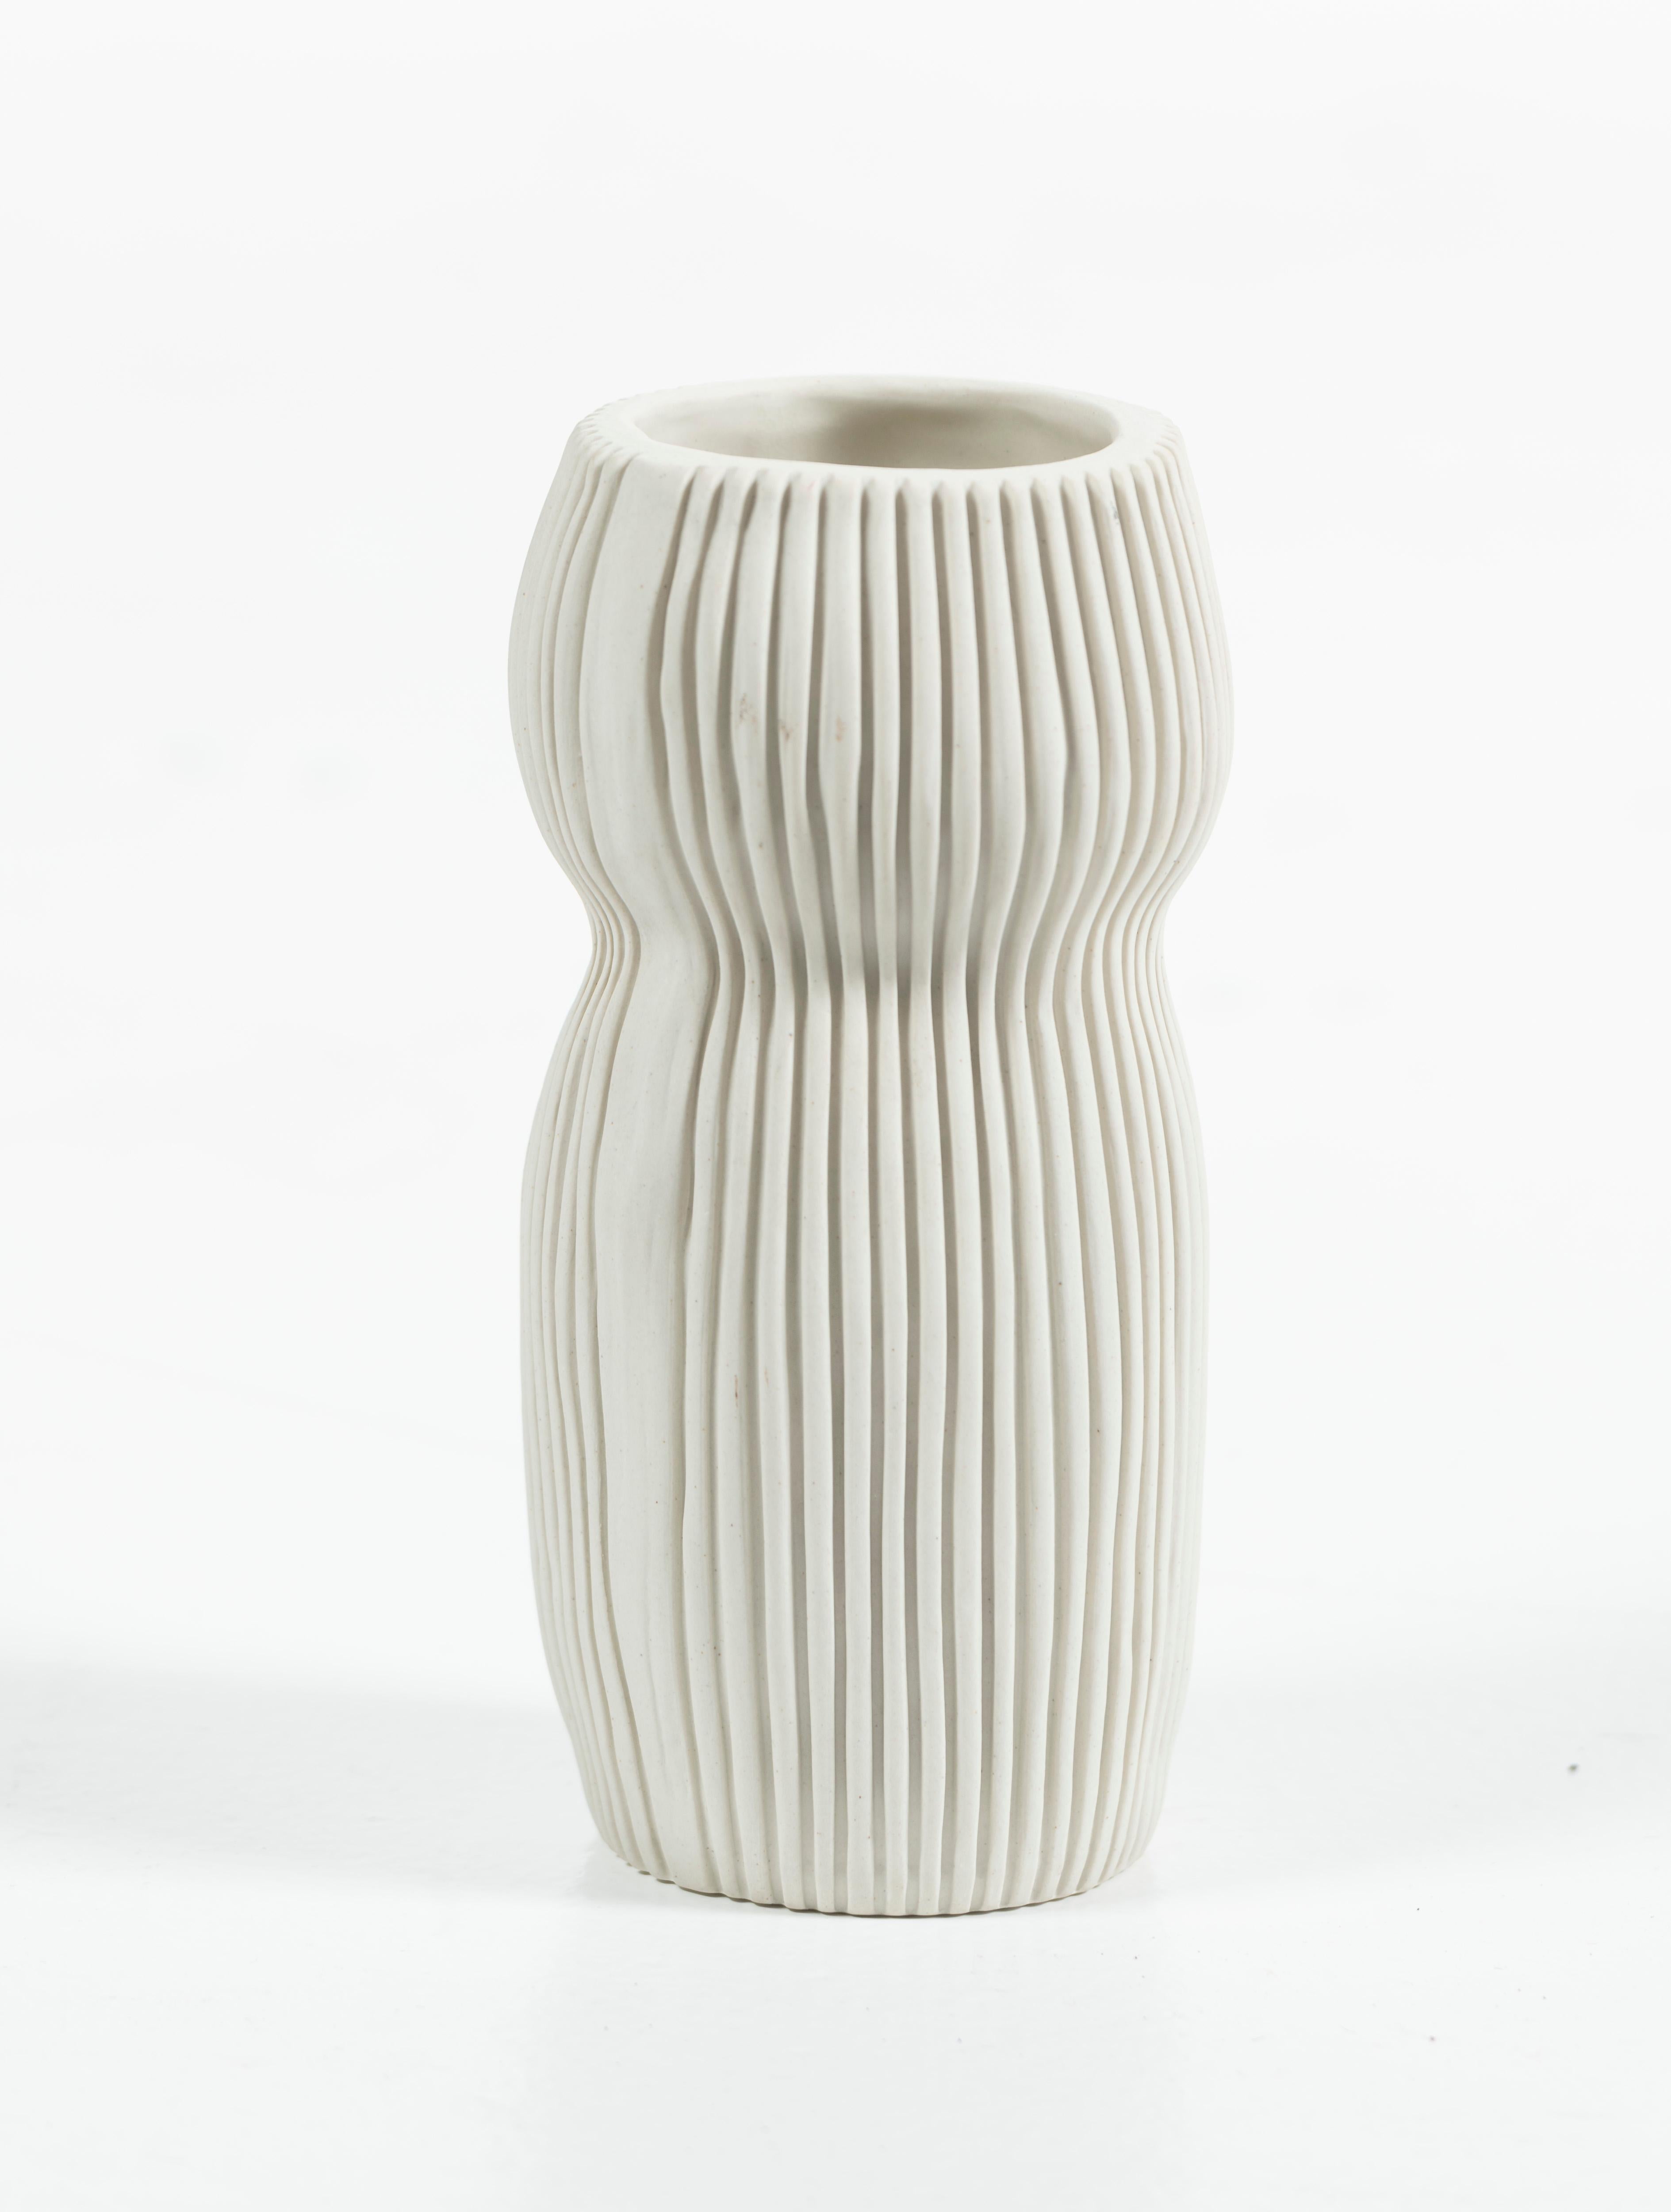 Modern hand-thrown ceramic vase in cream with vertical grooves along the side.  Signed on the bottom, artist unknown, this vase can hold flowers, decorate your shelves or tables on its own or as part as a grouping. Great gift. 